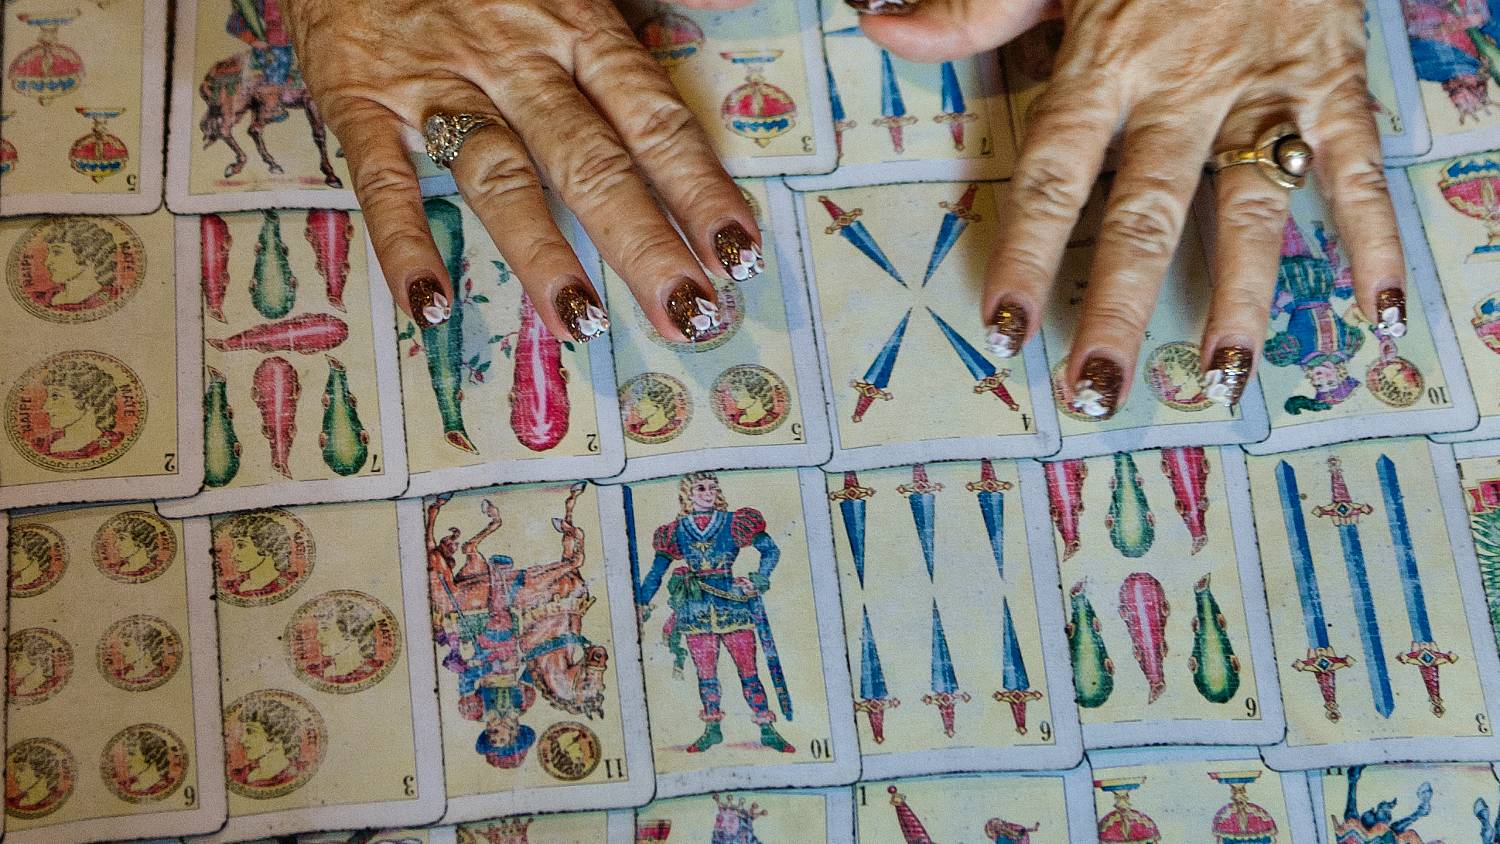 Tarot cards often feature swords in their imagery, an relic from the cards Mamluk origins (AFP/Paul J. Richards)